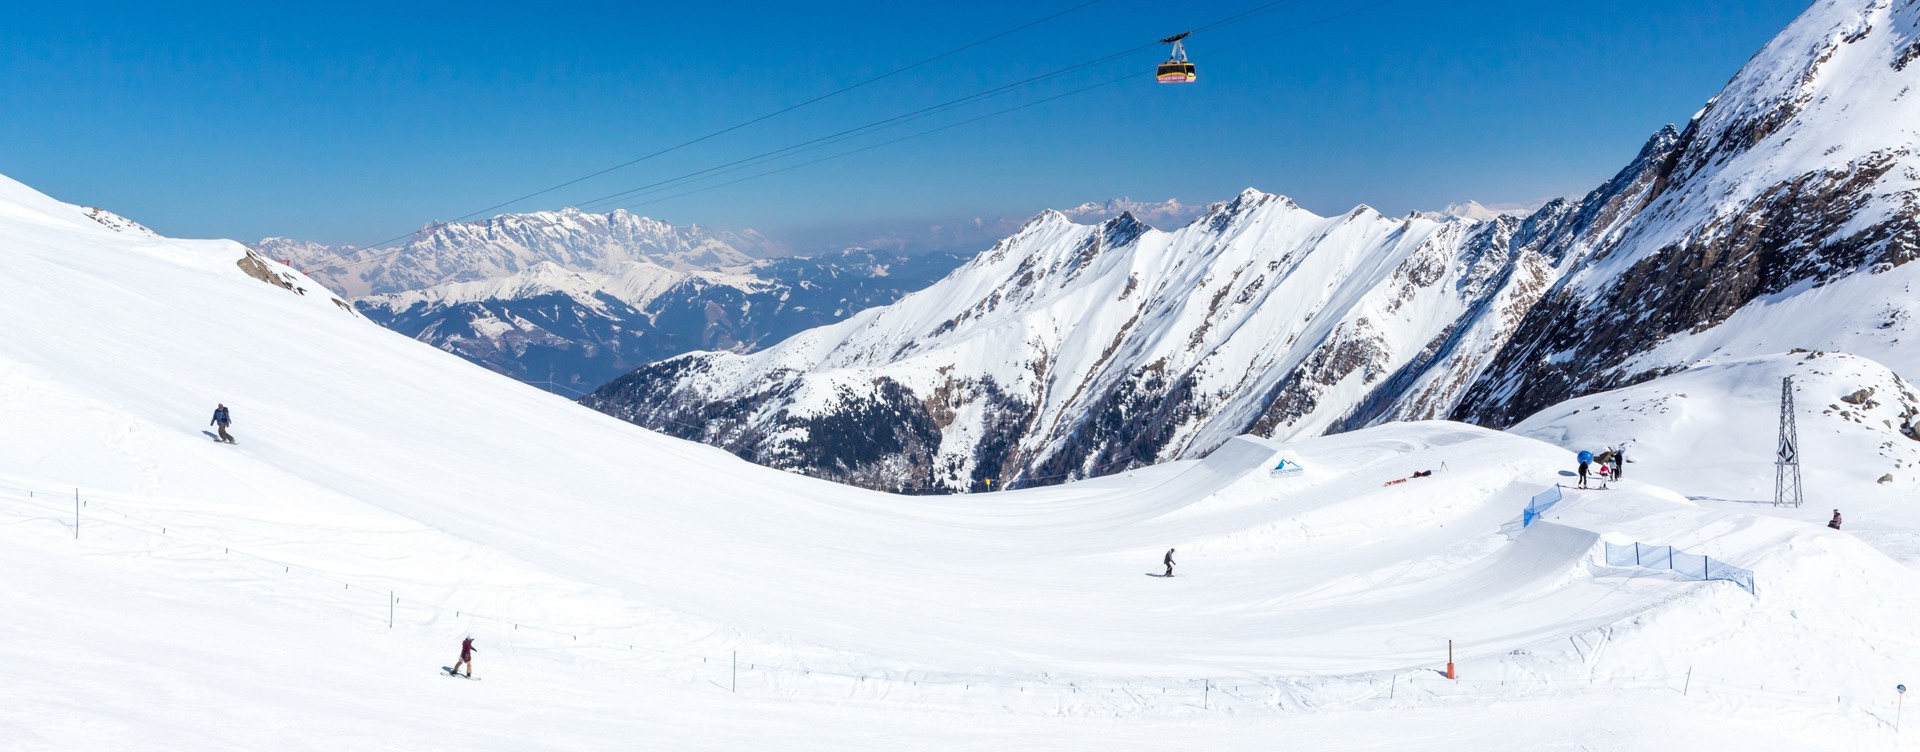 Experience an unforgettable winter sports holiday
in the Austrian Alps